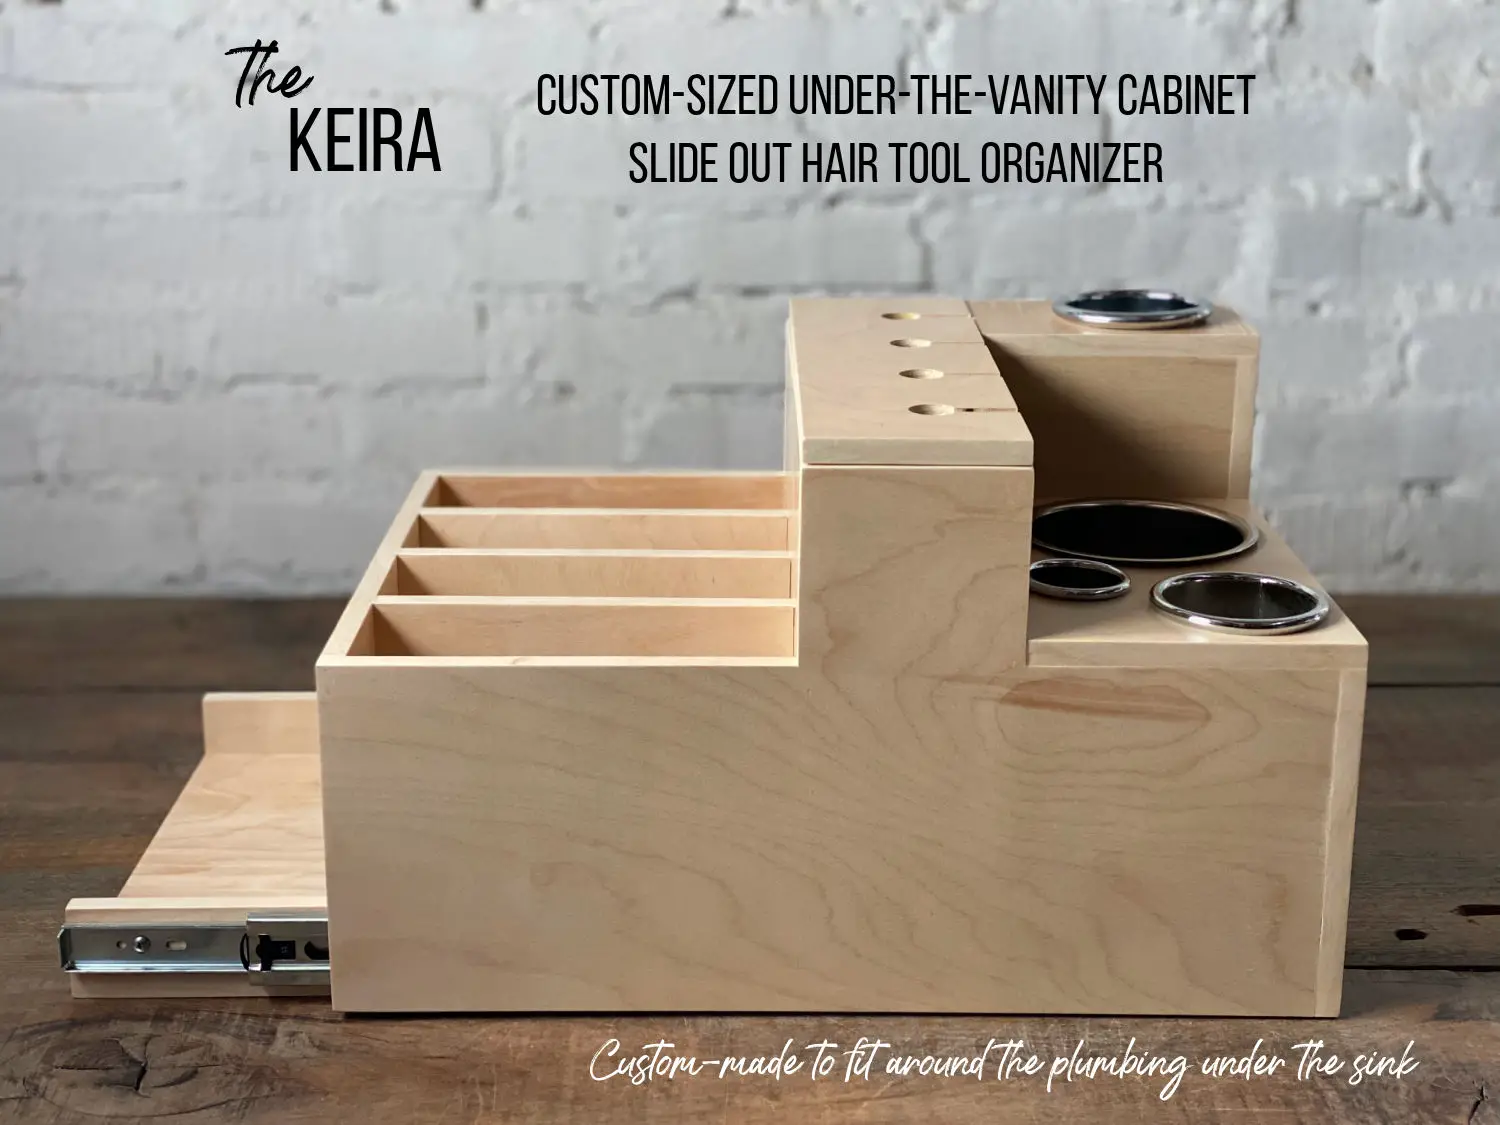 https://www.simplicityinthesouth.com/wp-content/uploads/2020/05/The-Keira-Slide-Out-Hair-Tool-Organizer-for-Vanities.jpg-.jpg